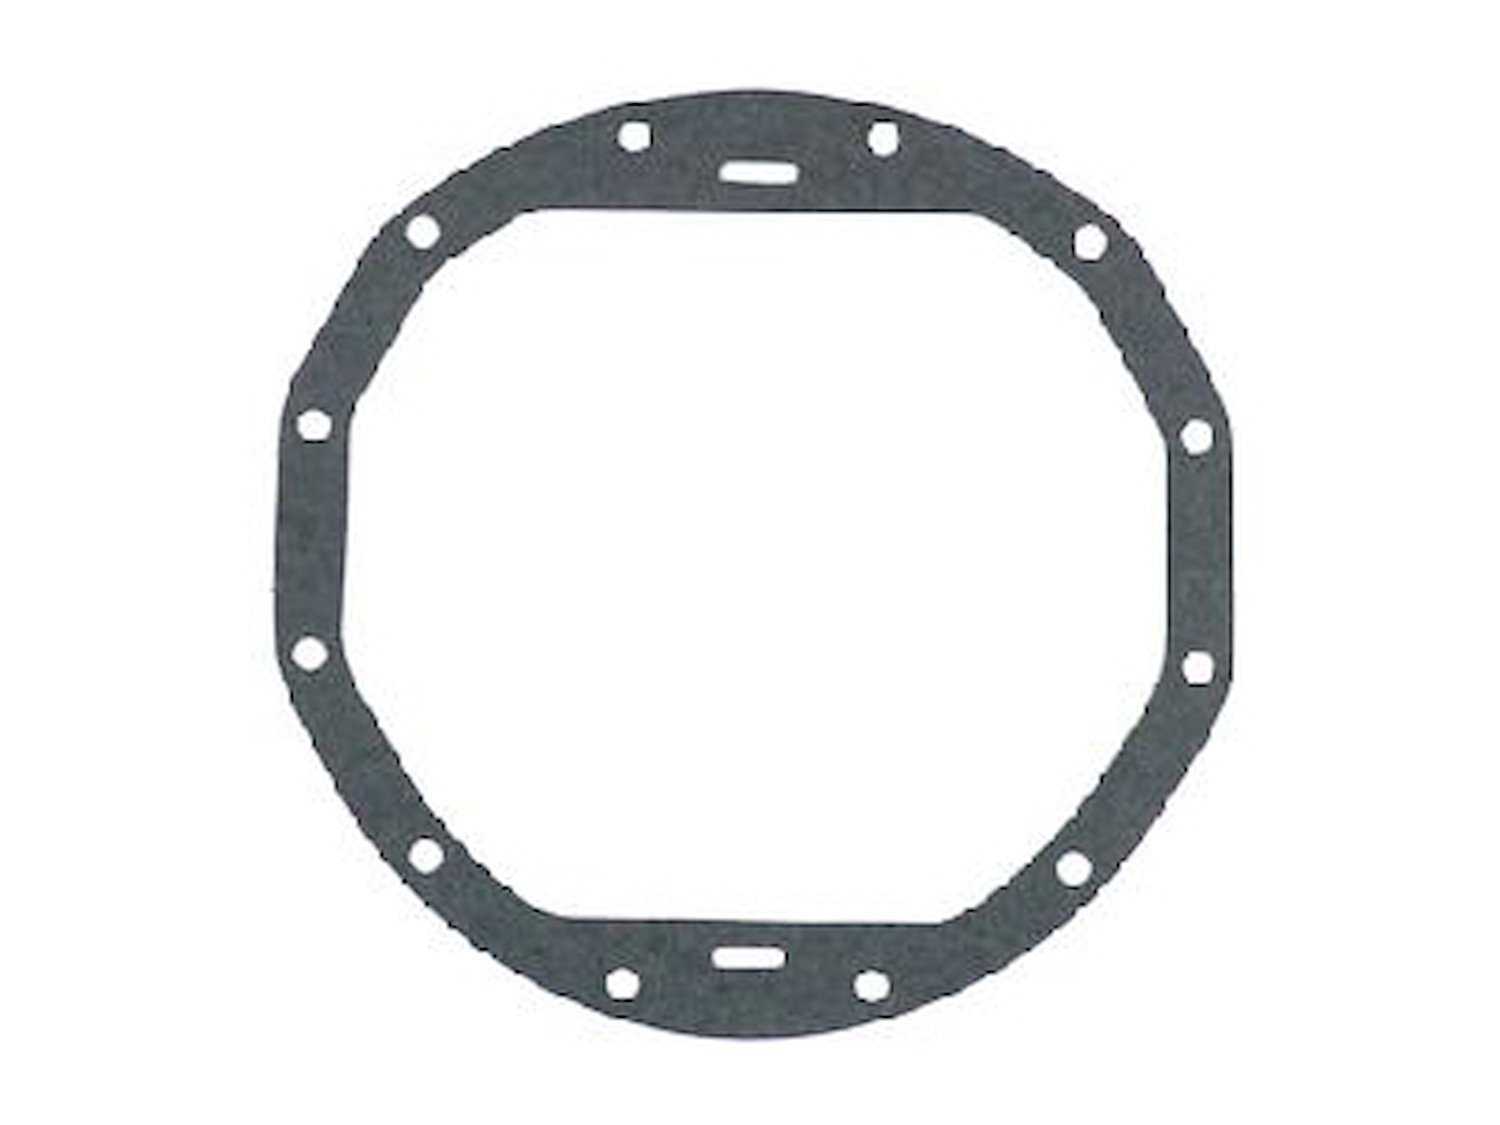 Differential Cover Gasket Most 1964-72 GM Passenger Cars